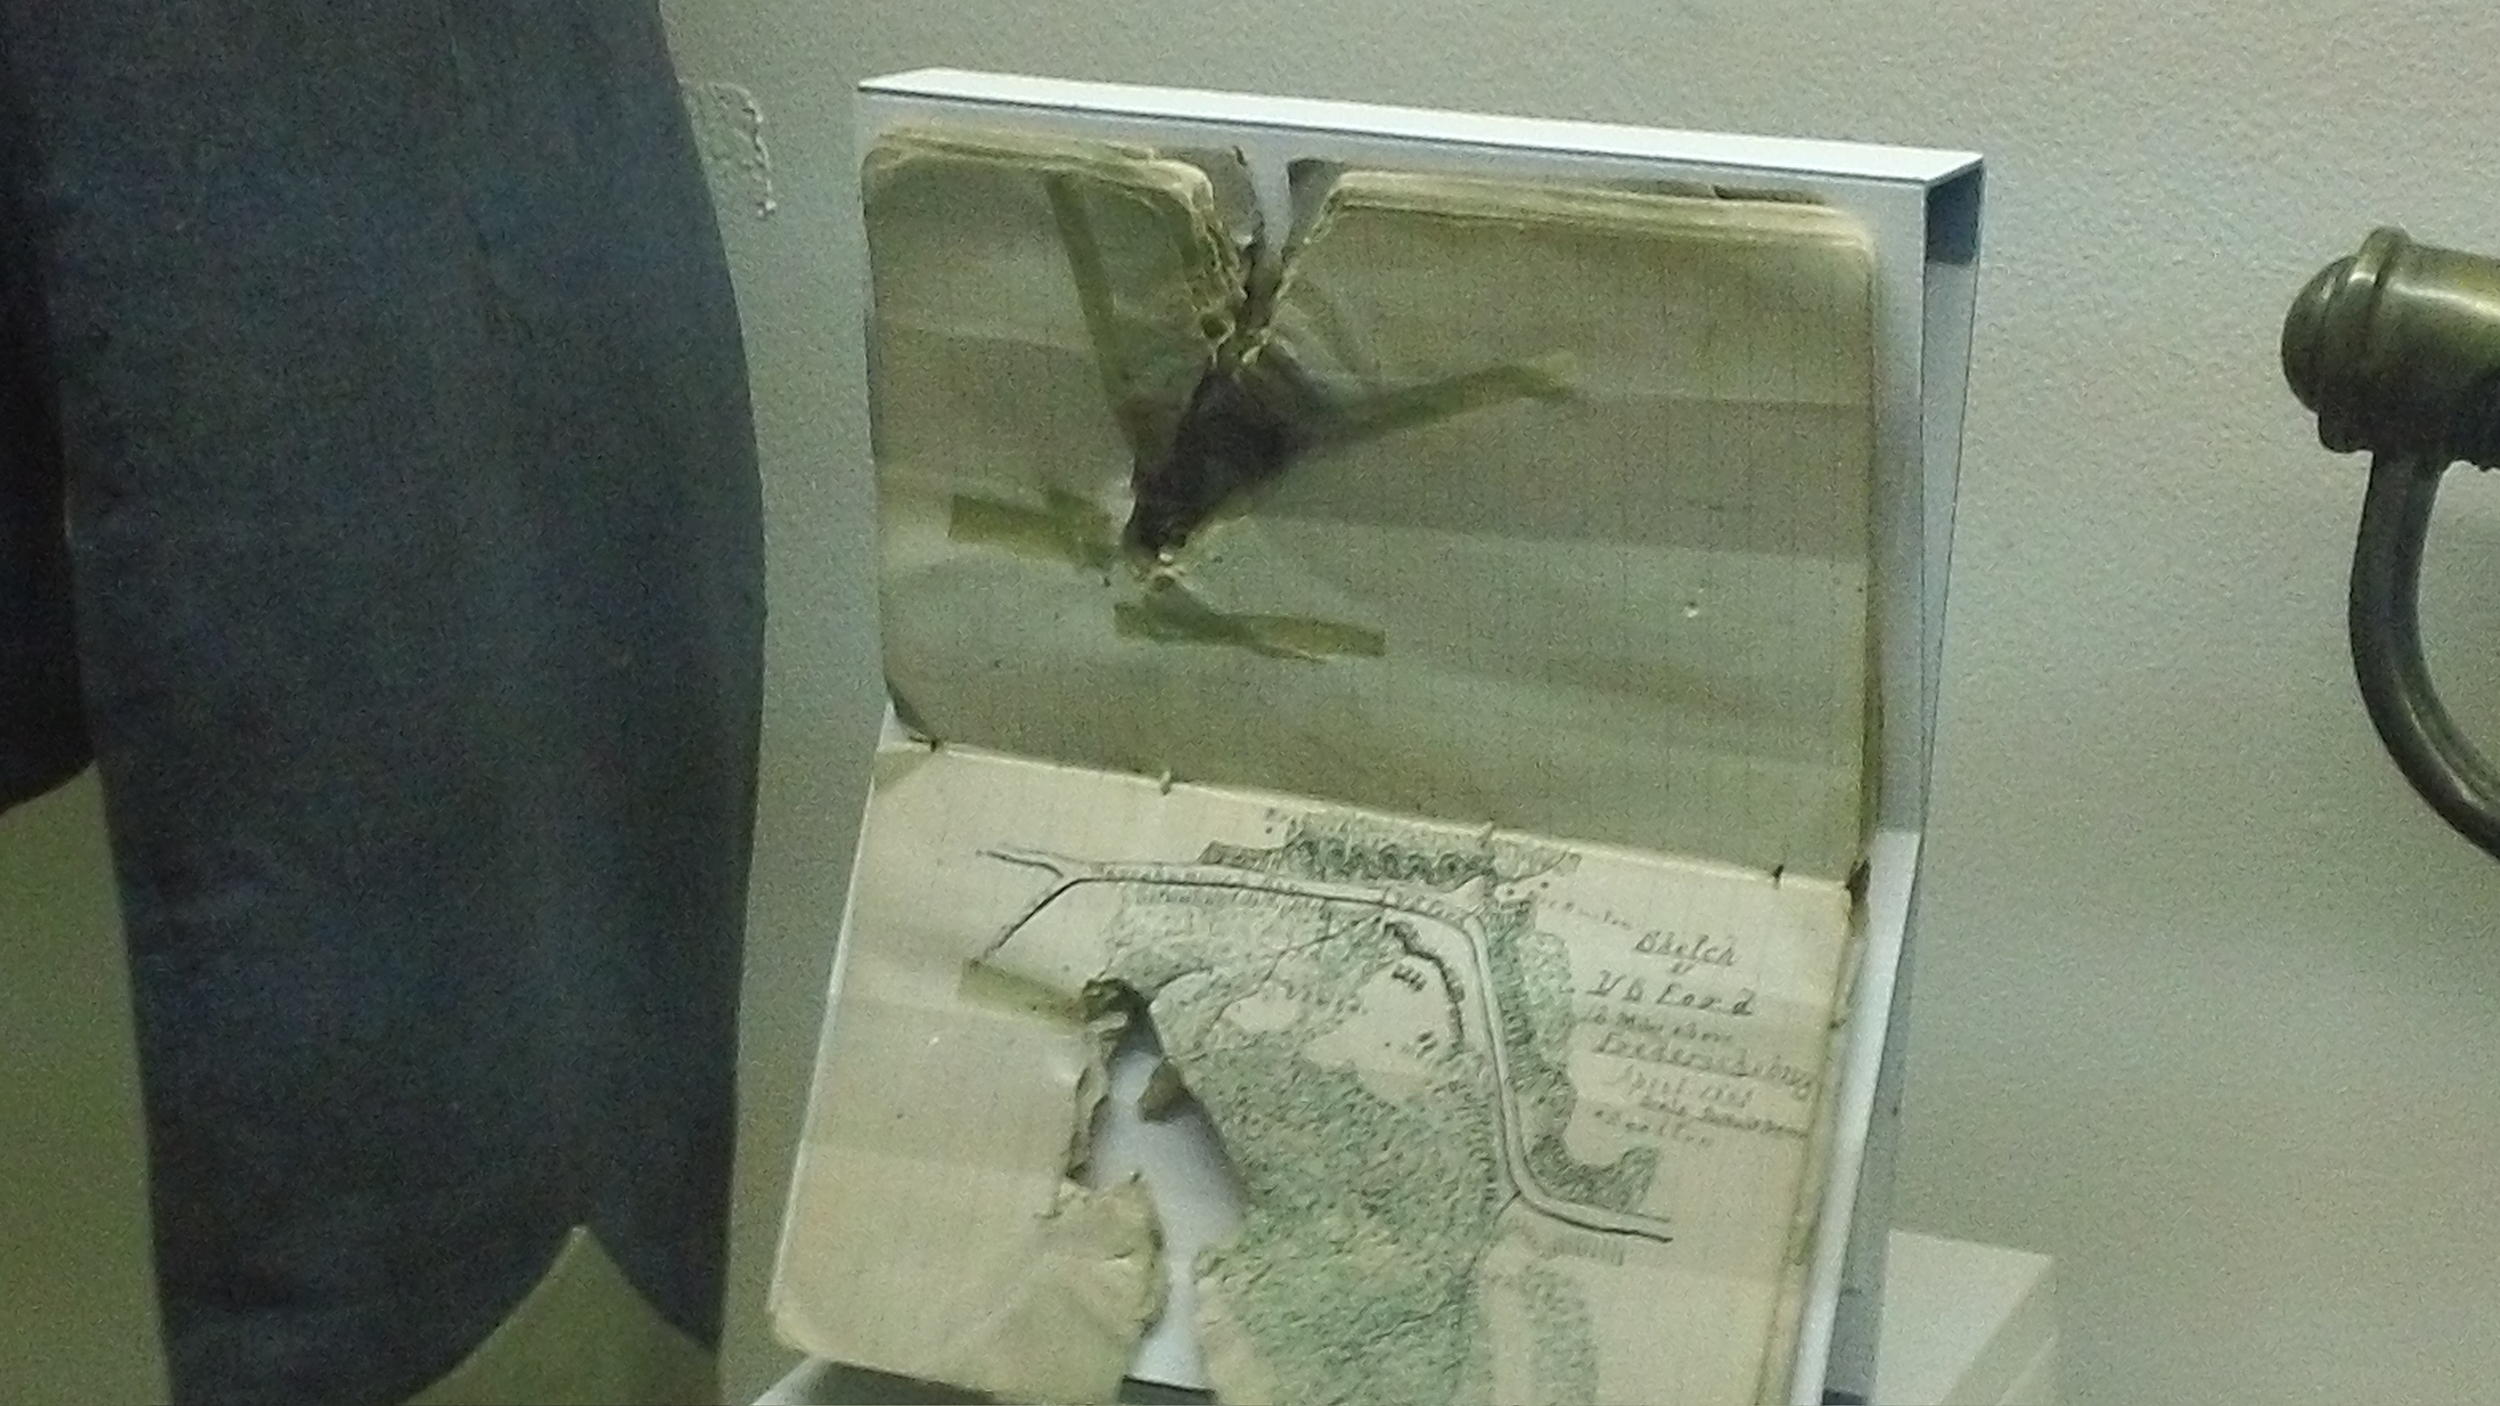  The field notebook of James Boswell, pierced by a bullet. A member of Stonewall Jackson's staff, Boswell was killed in the same confused flurry of friendly fire which also hit Stonewall. 